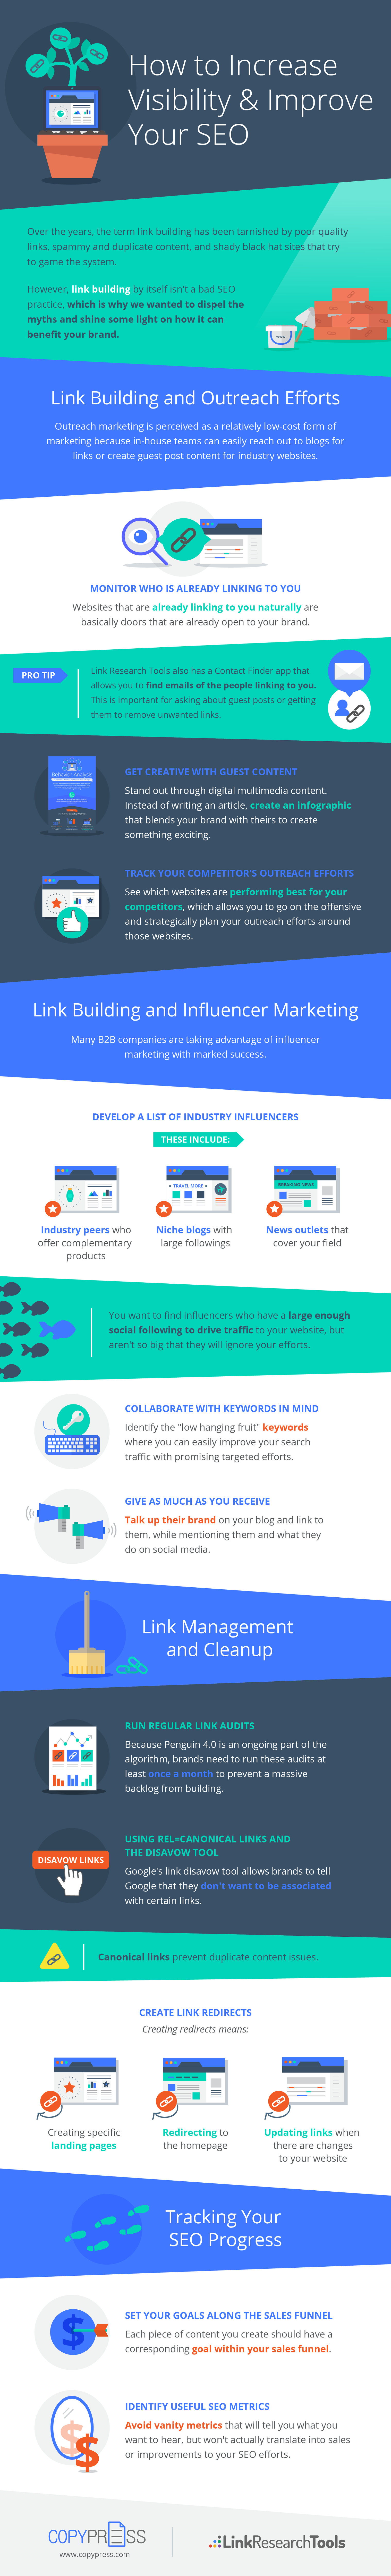 Infographic: How to Increase Visibility & Improve Your SEO